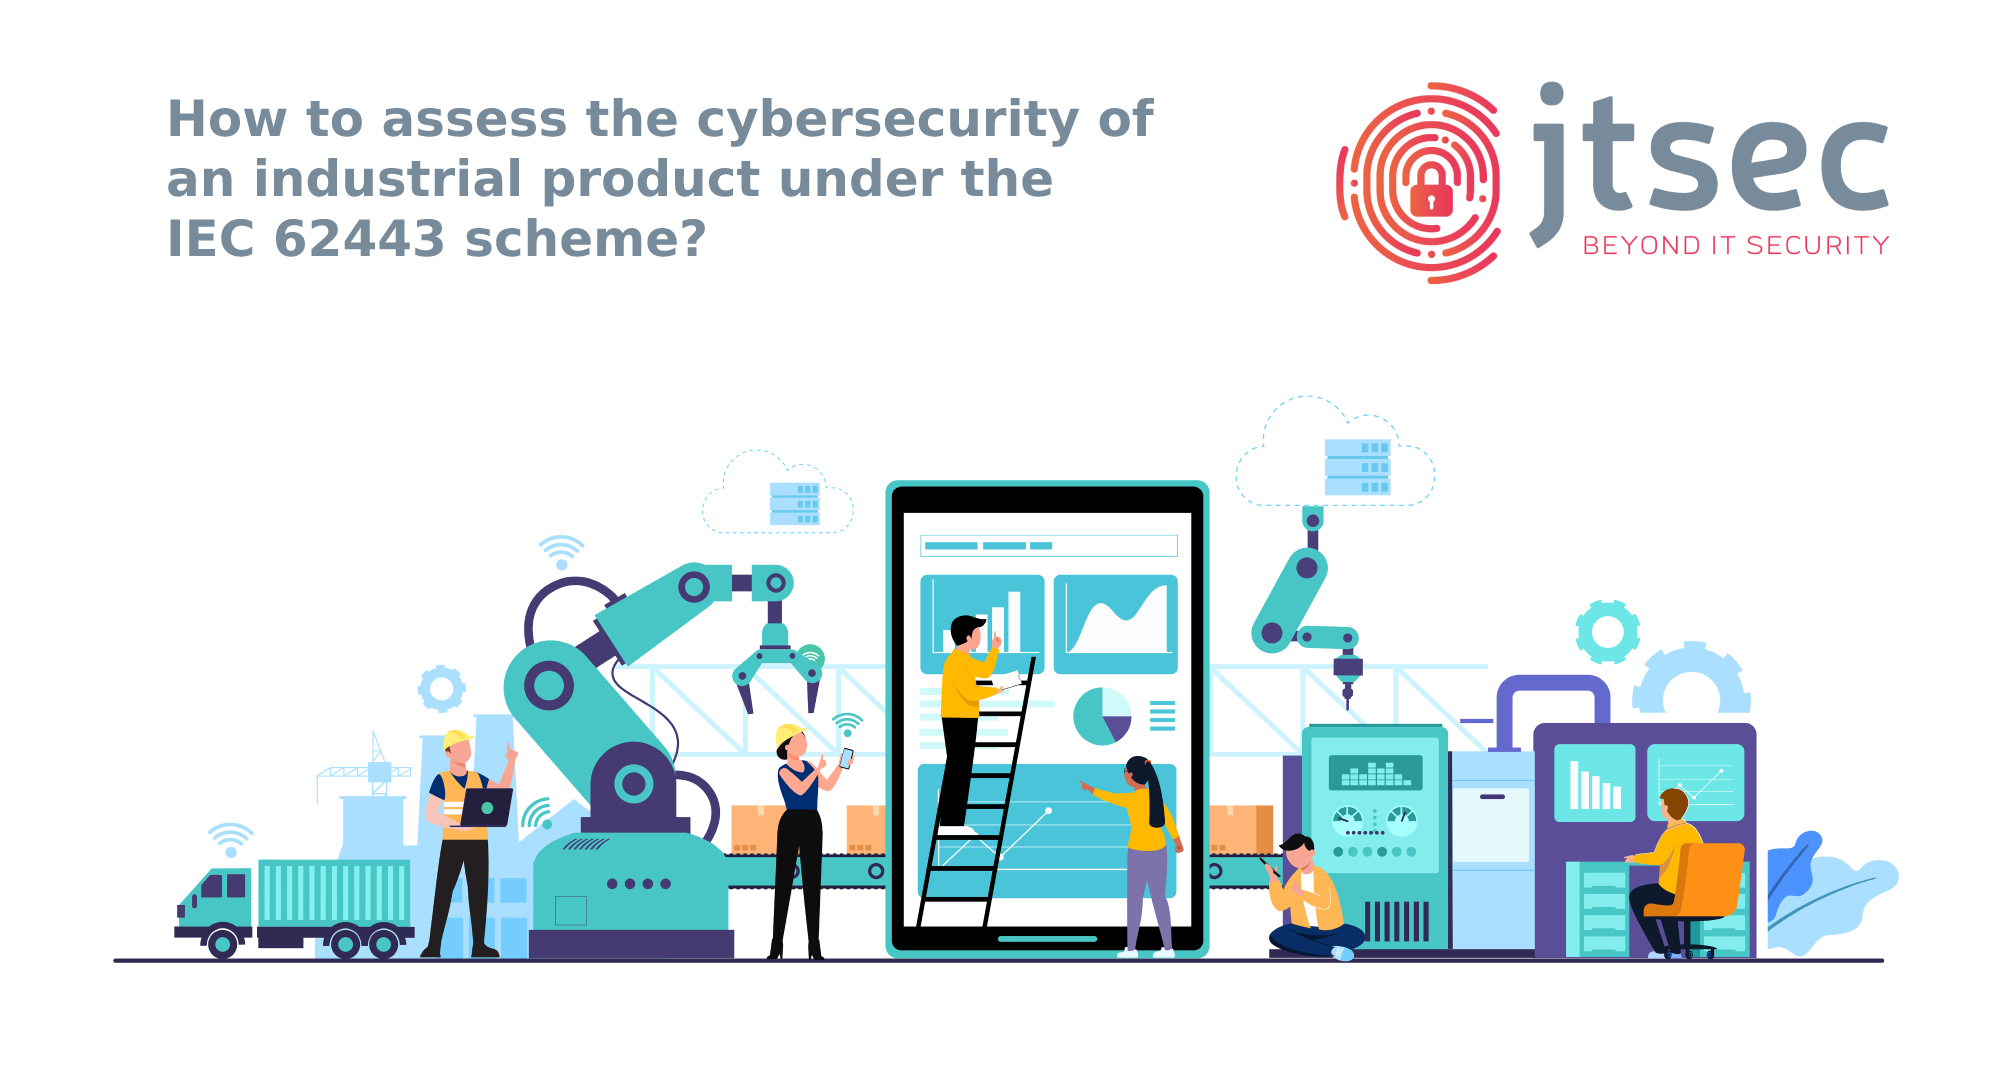 How to assess the cybersecurity of an industrial product under the IEC 62443 scheme?